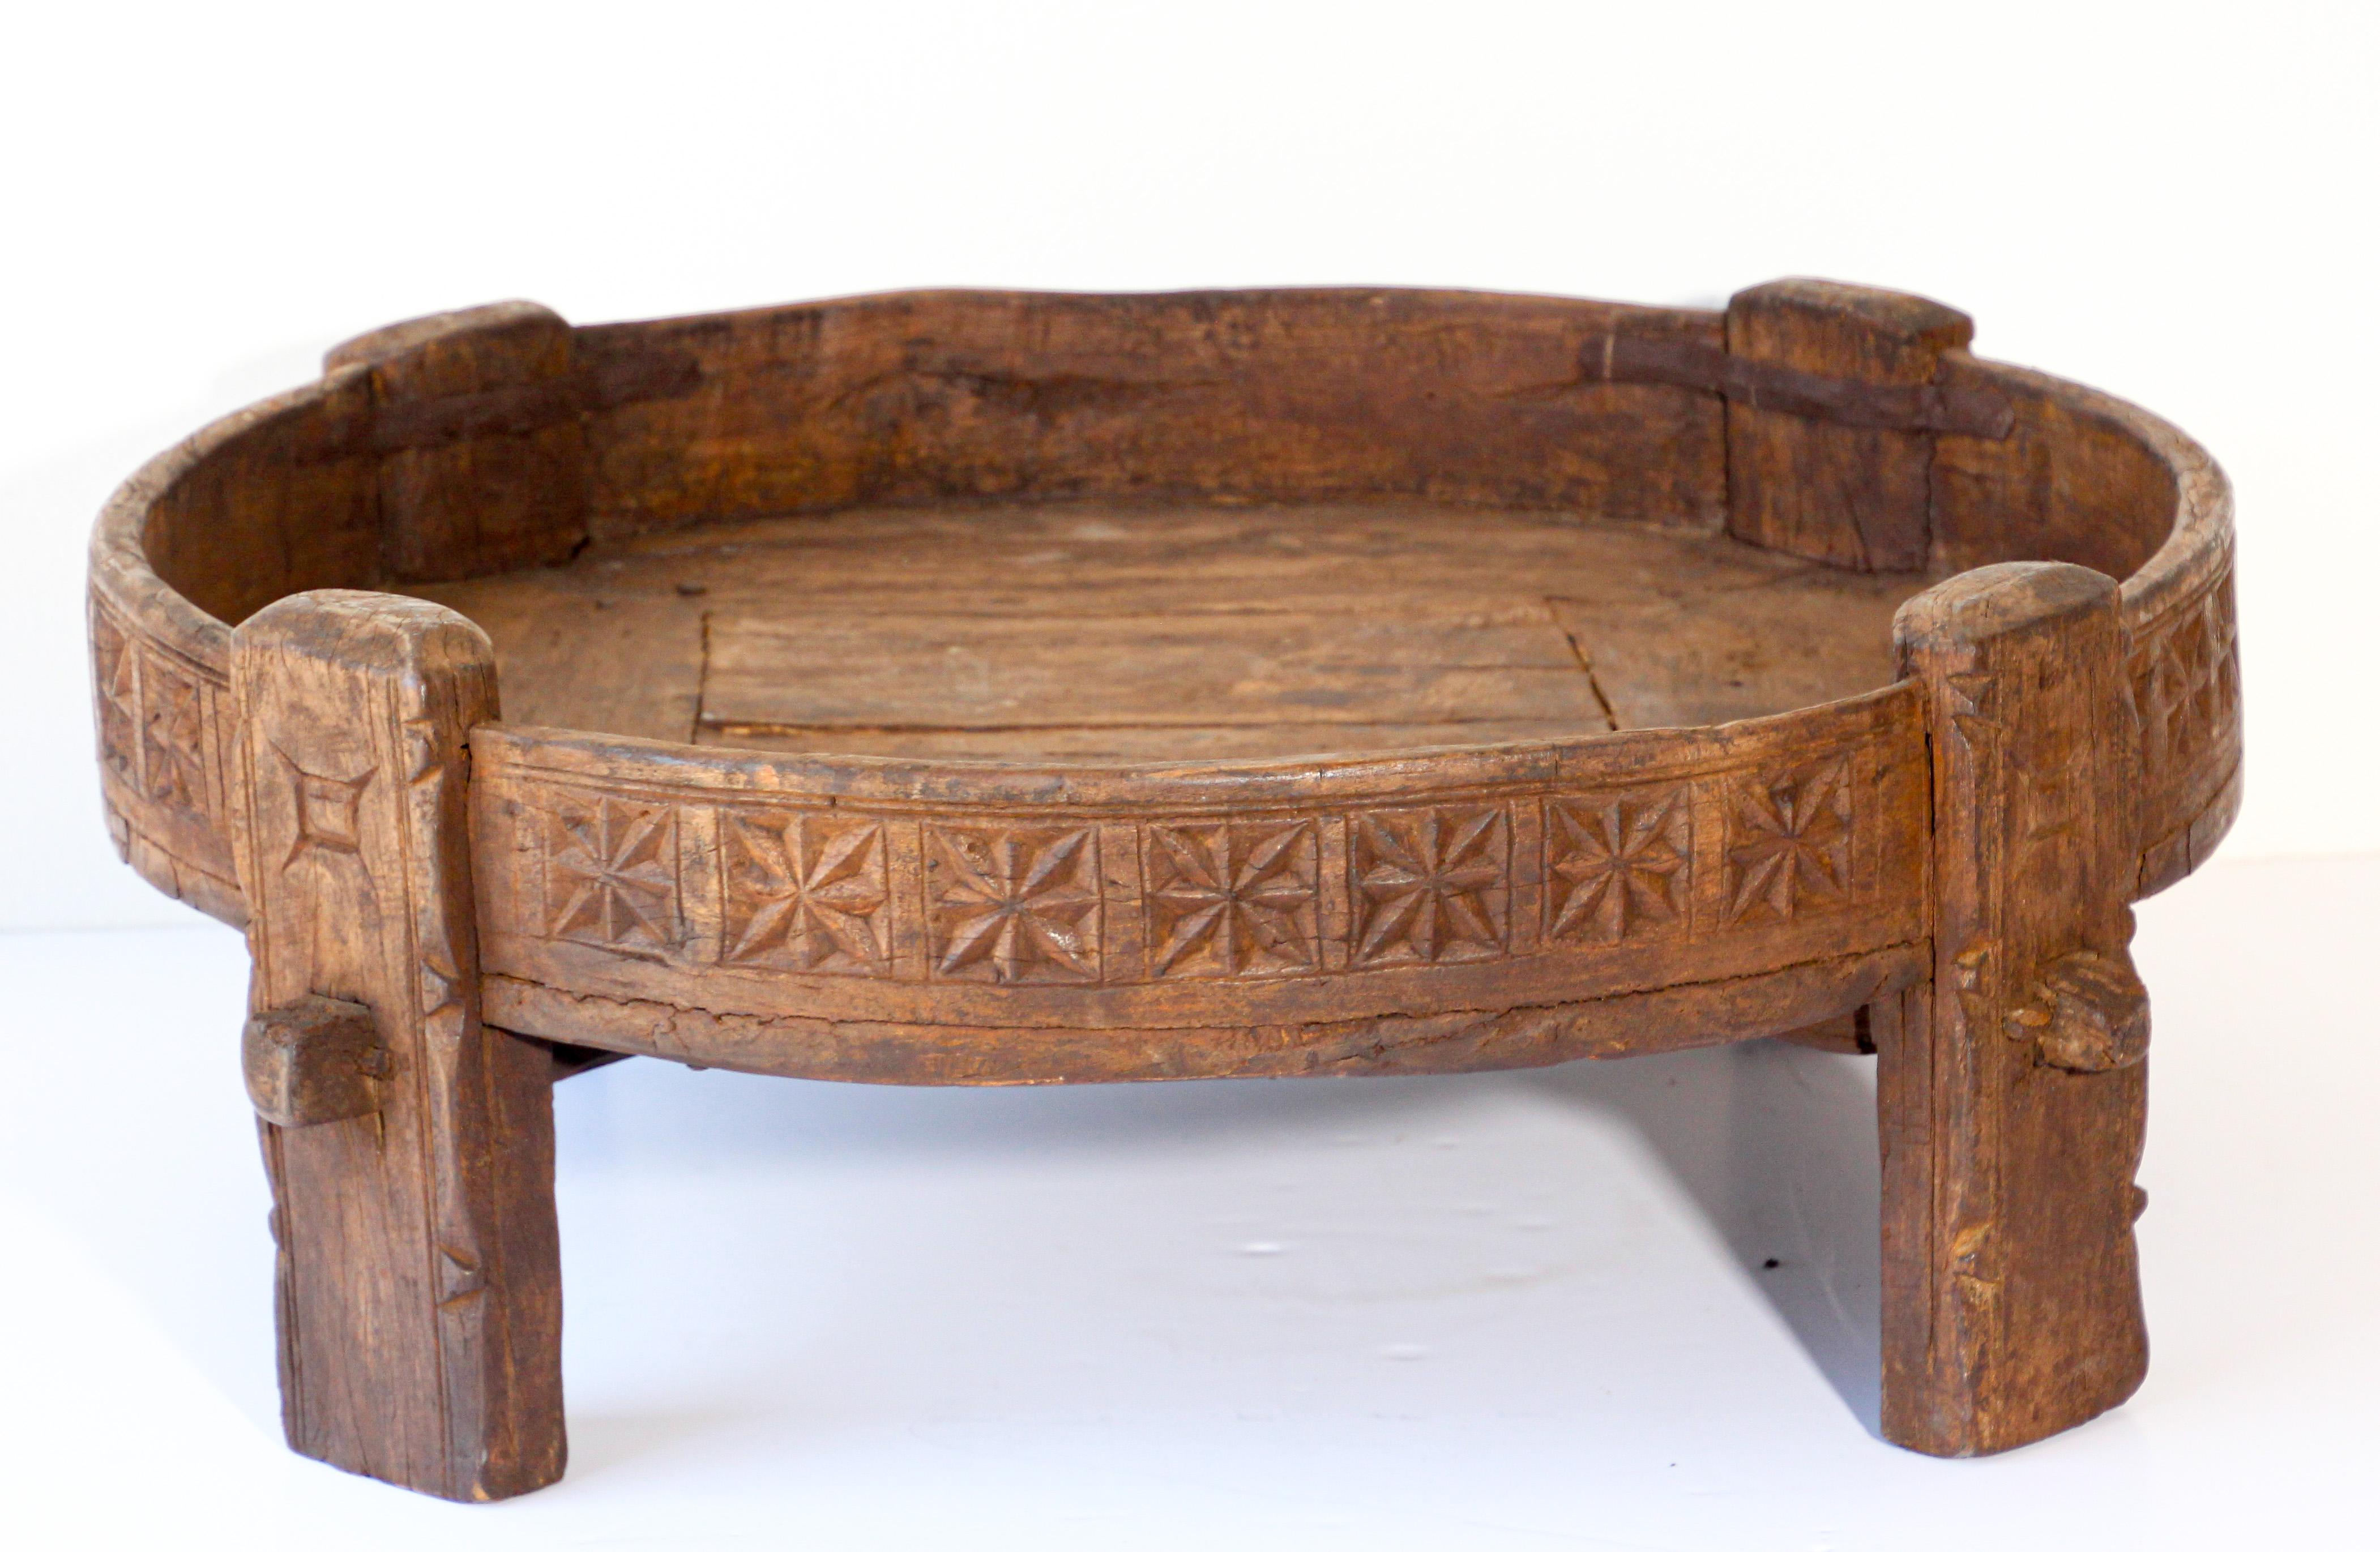 Large antique hand carved wood Indian grinder tribal table.
Walnut color hand carved with geometric tribal design.
Handcrafted of wood and iron, hand carved with geometric Ethnic tribal design.
Very sturdy rustic wood table with nice patina,